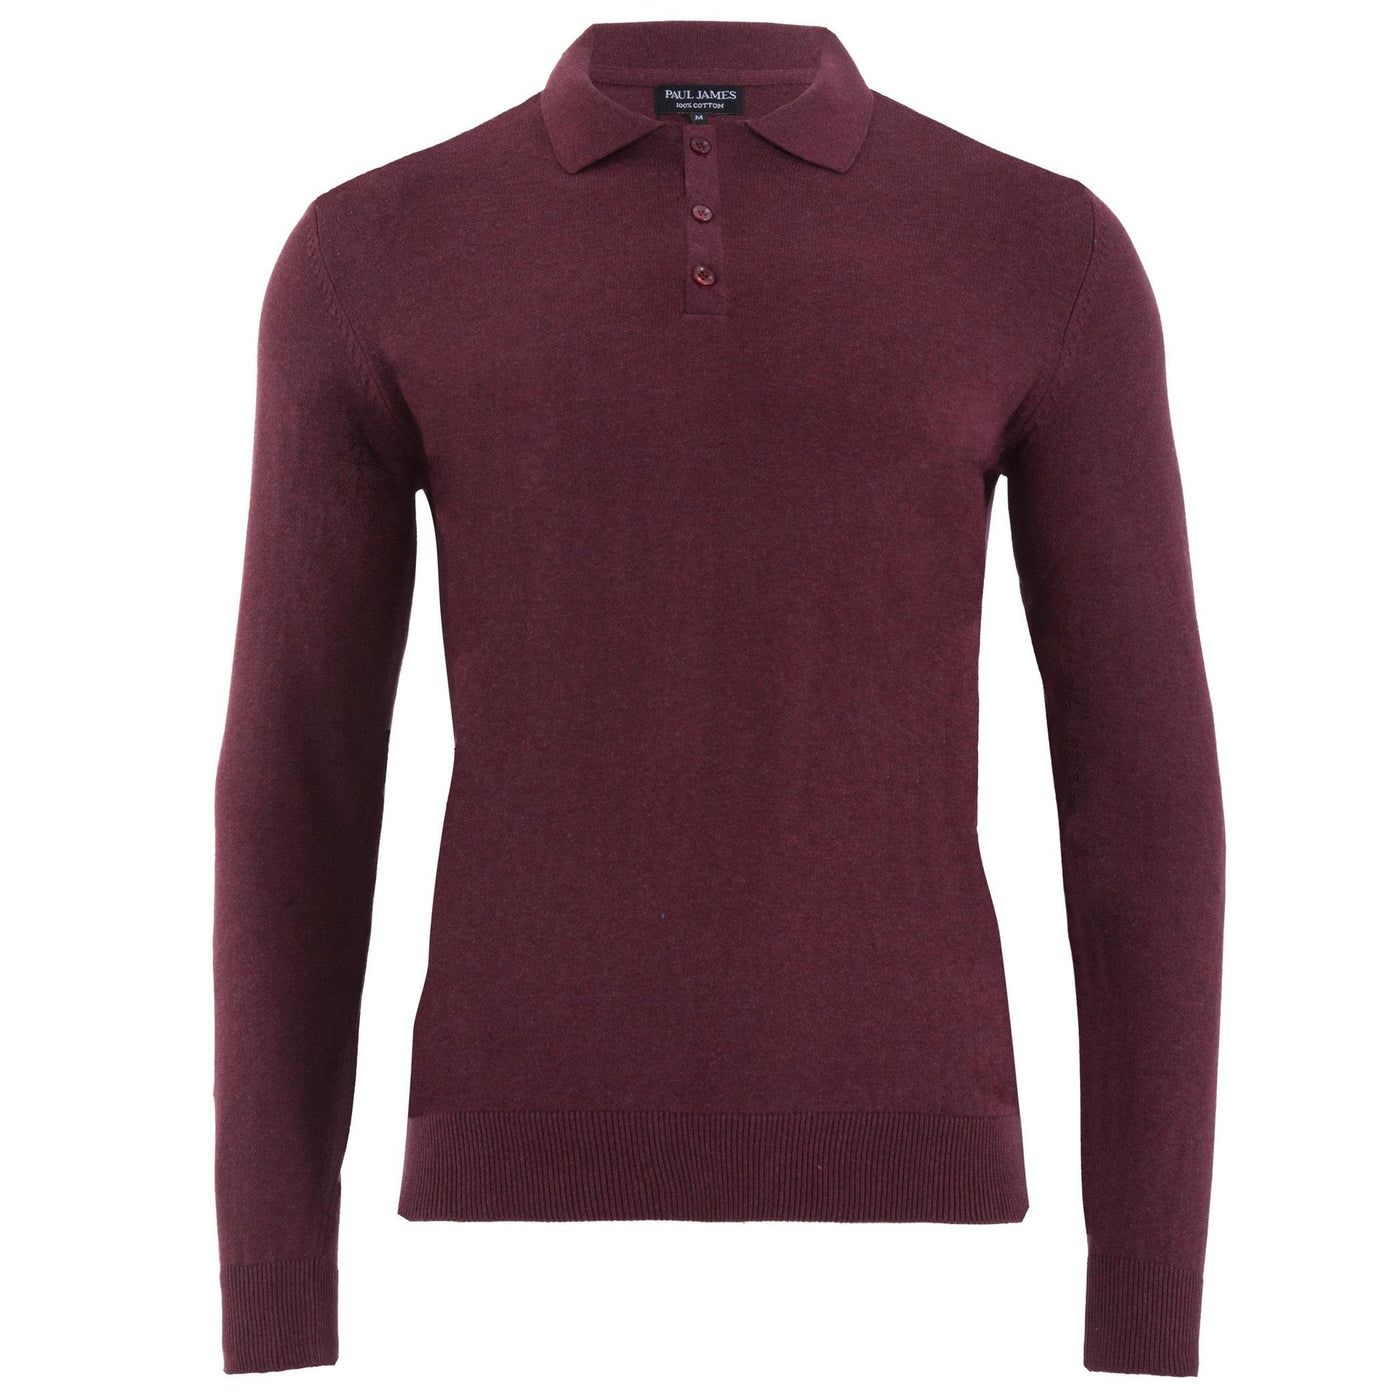 100% Cotton Long Sleeve Knitted Polo Shirt - Paul James Knitwear